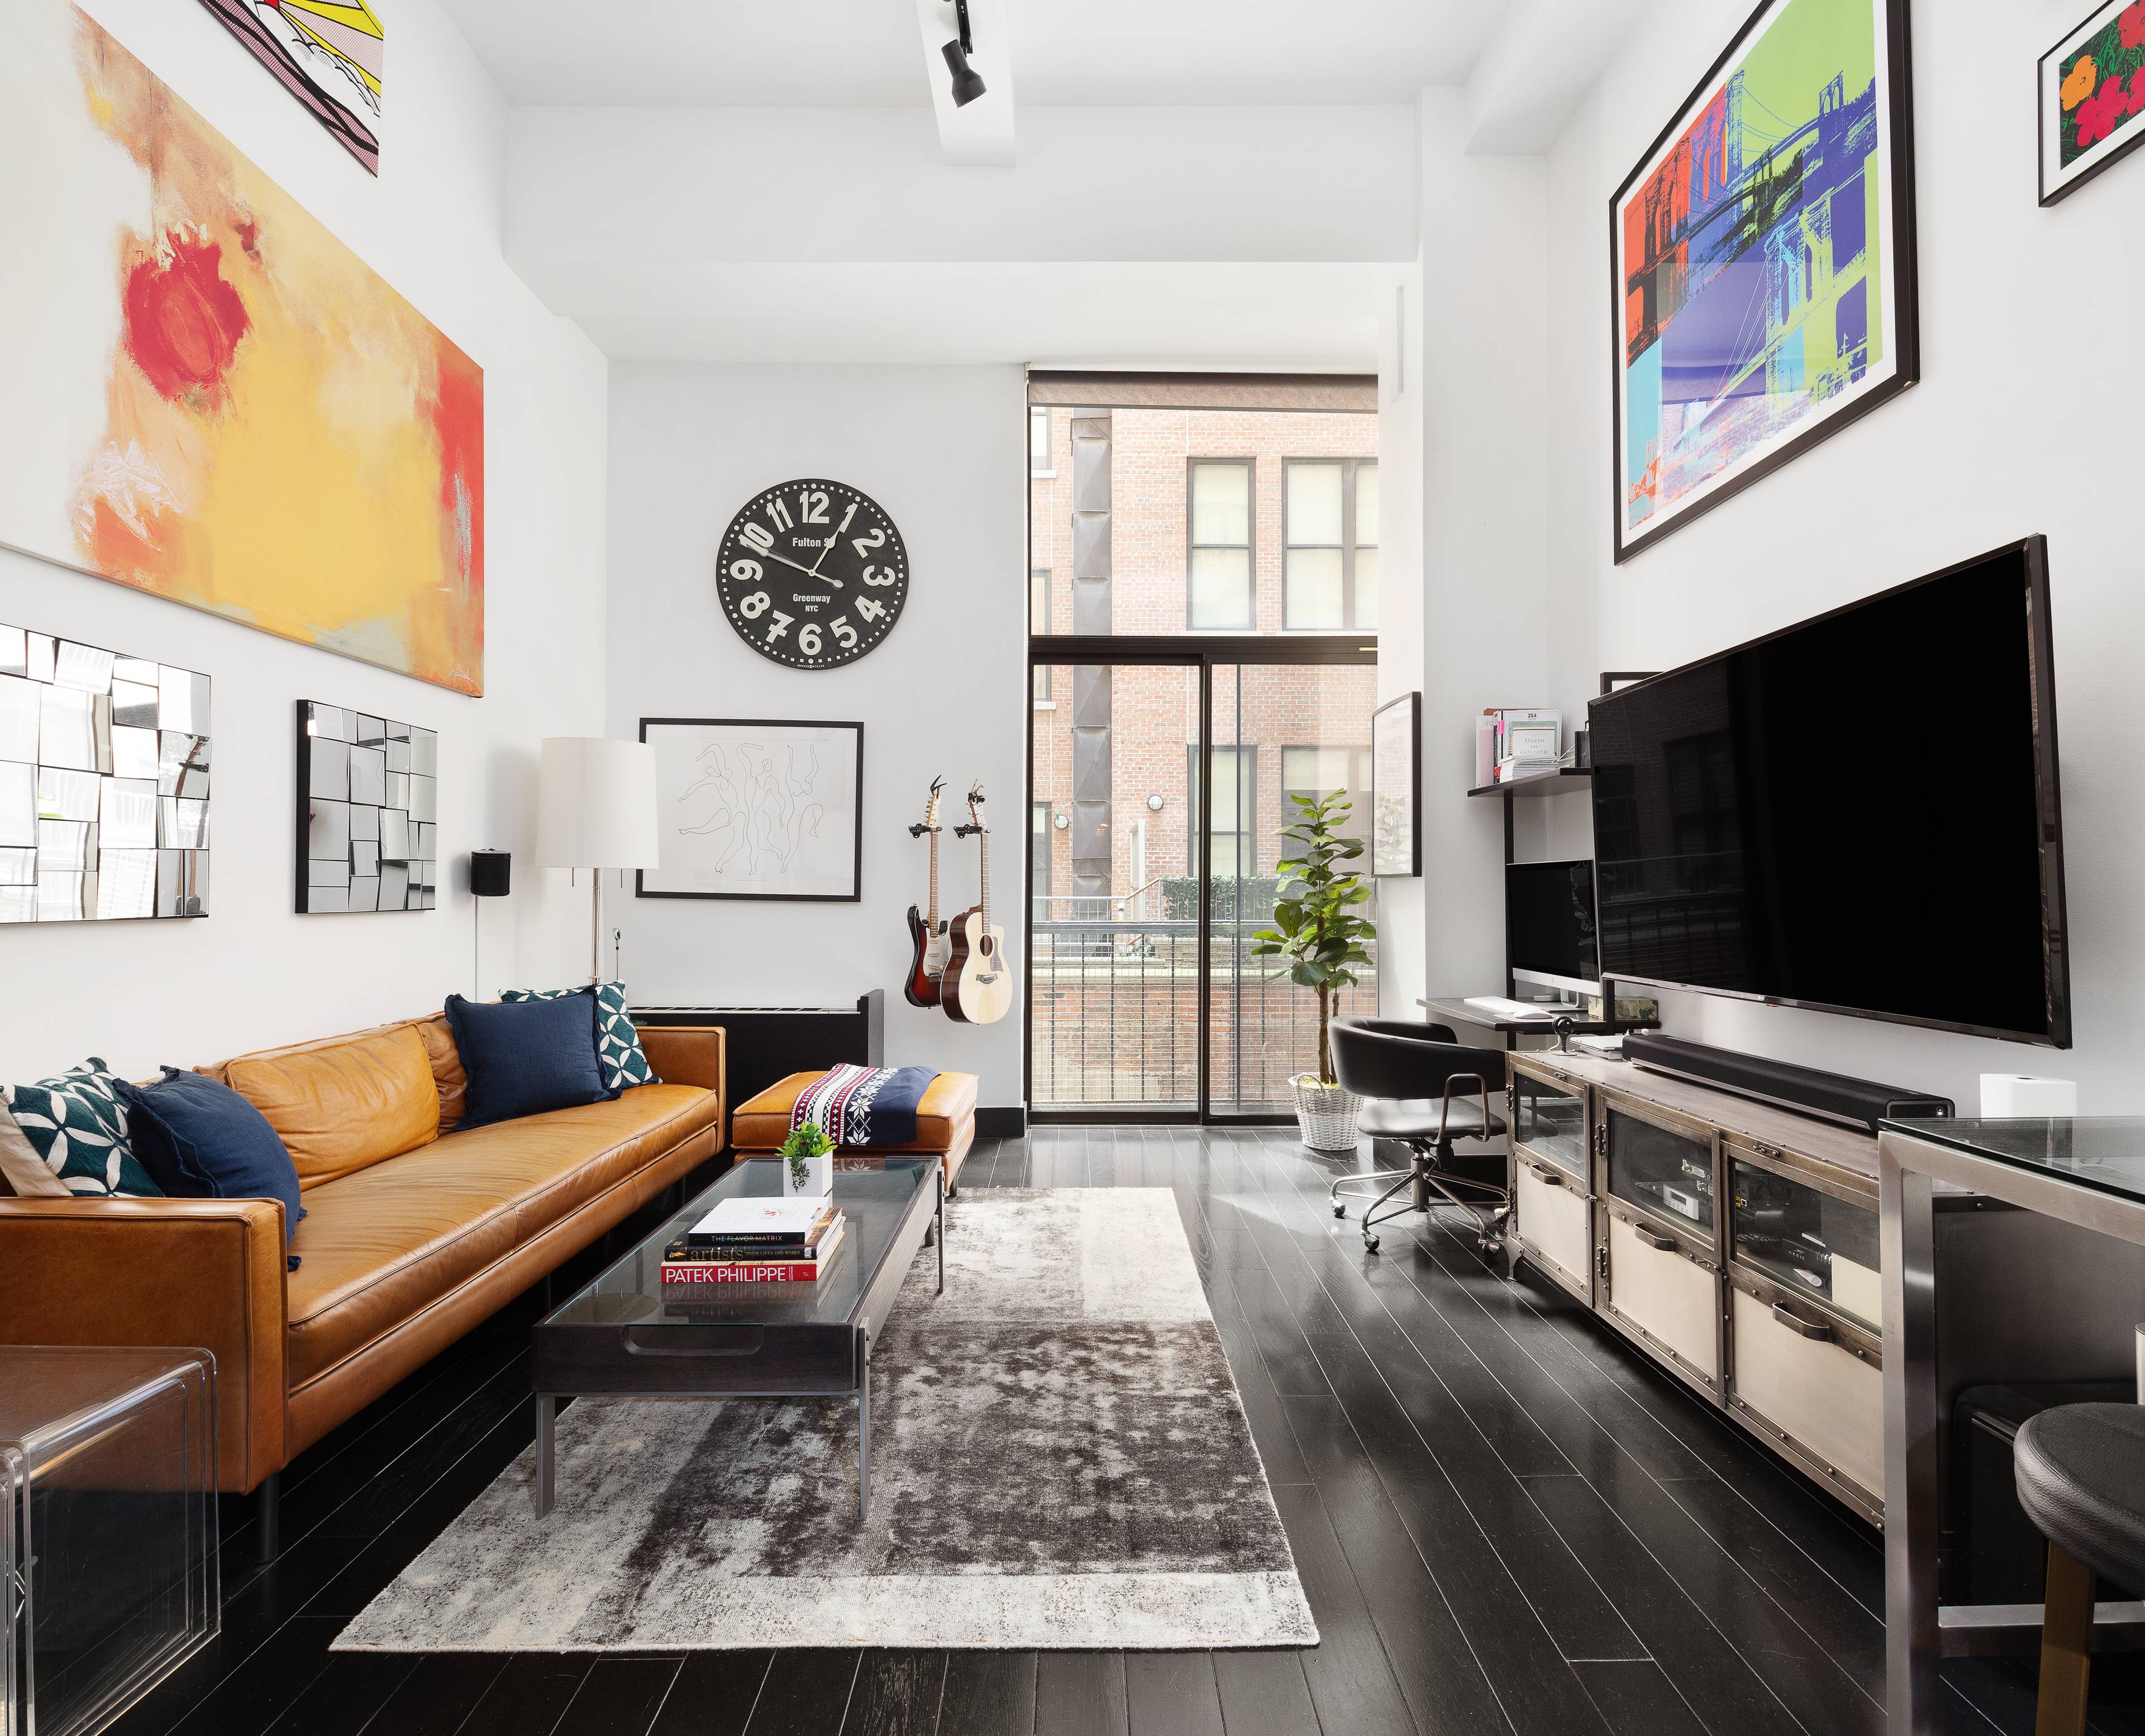 254 Park Avenue South 3O is a stunning loft apartment located in the desirable Flatiron neighborhood.